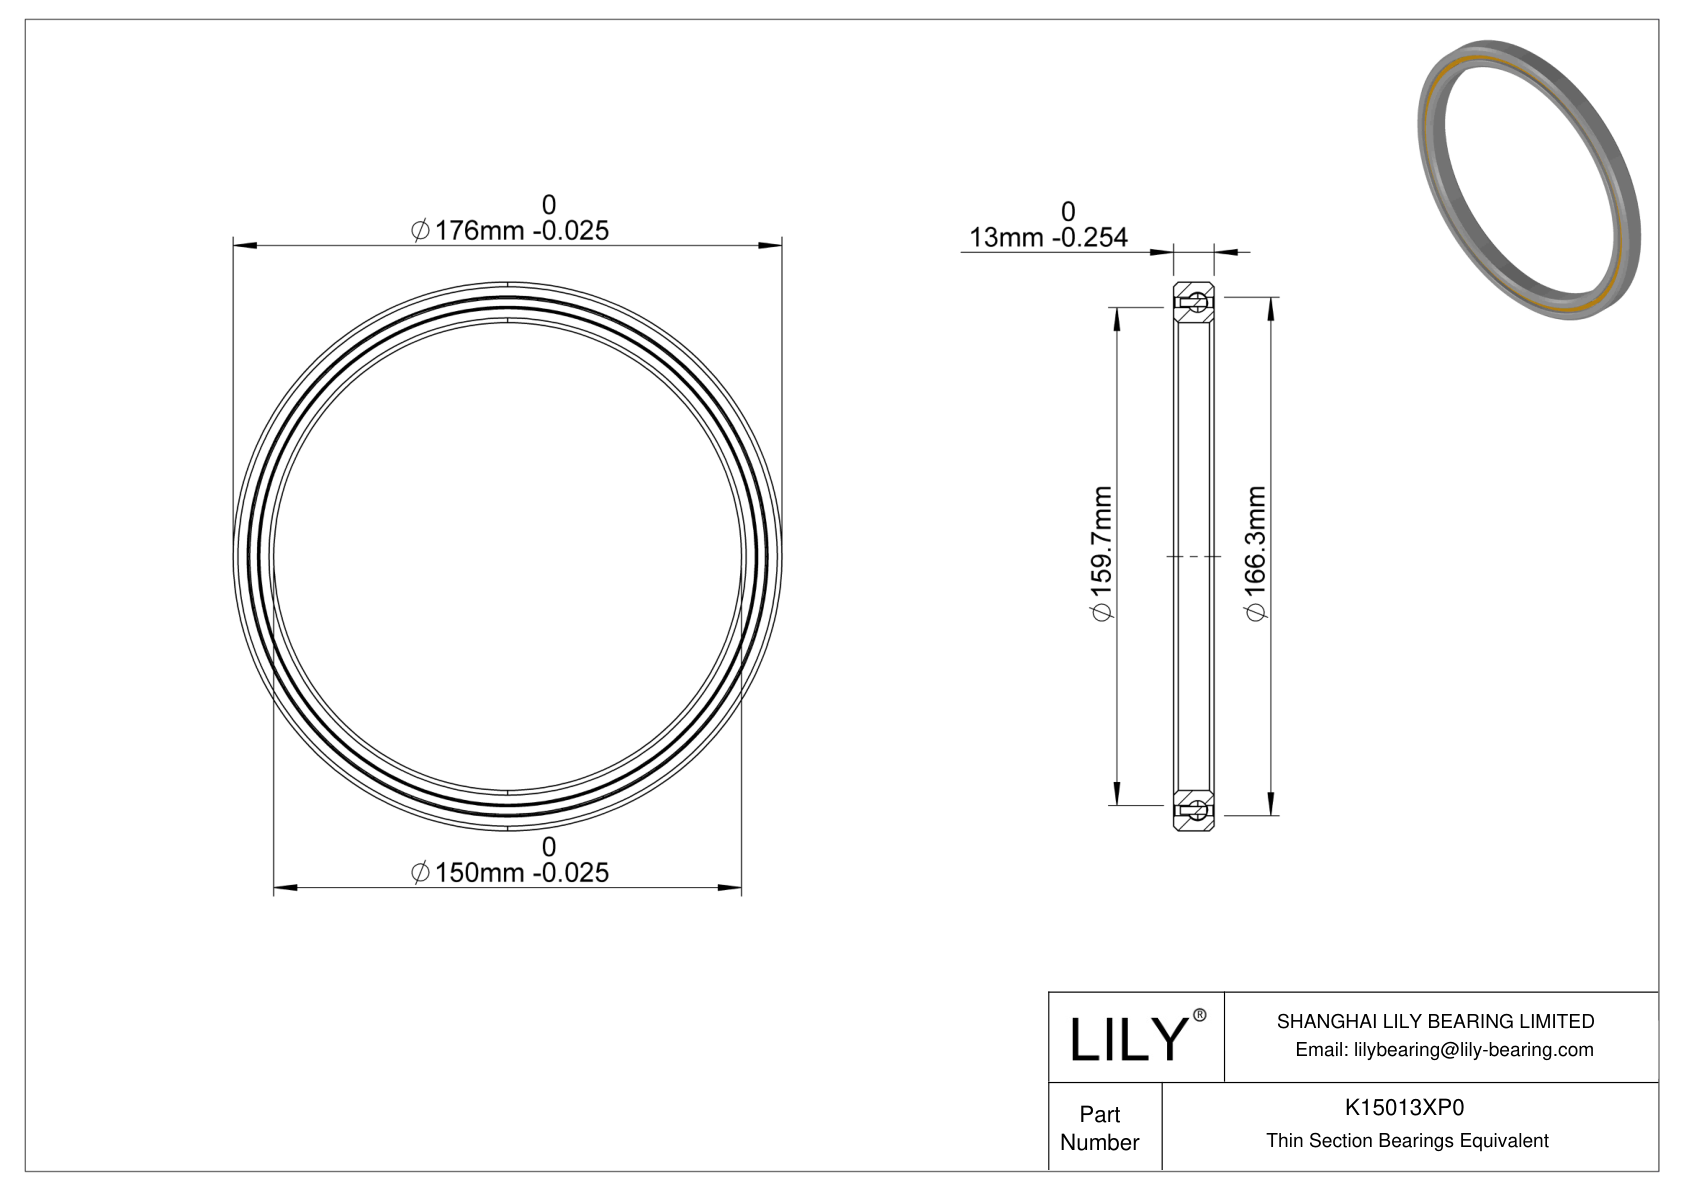 K15013XP0 Constant Section (CS) Bearings cad drawing